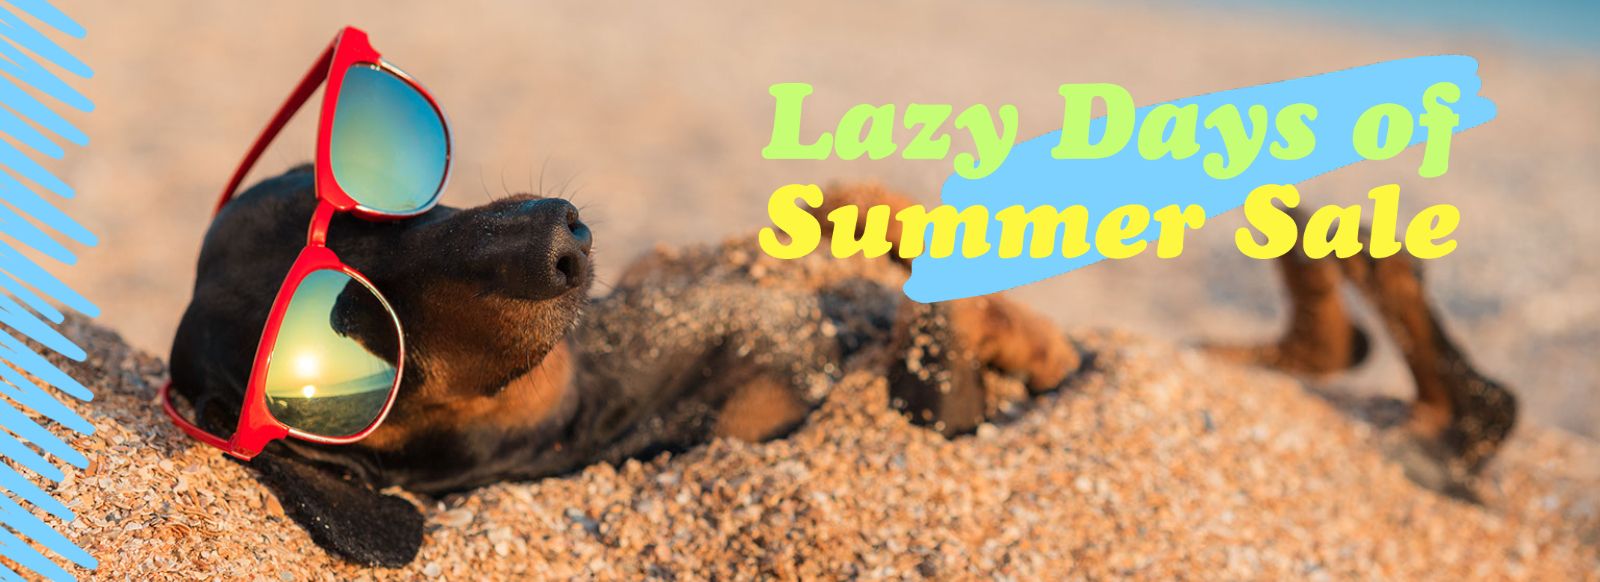 Lazy Days of Summer Sale